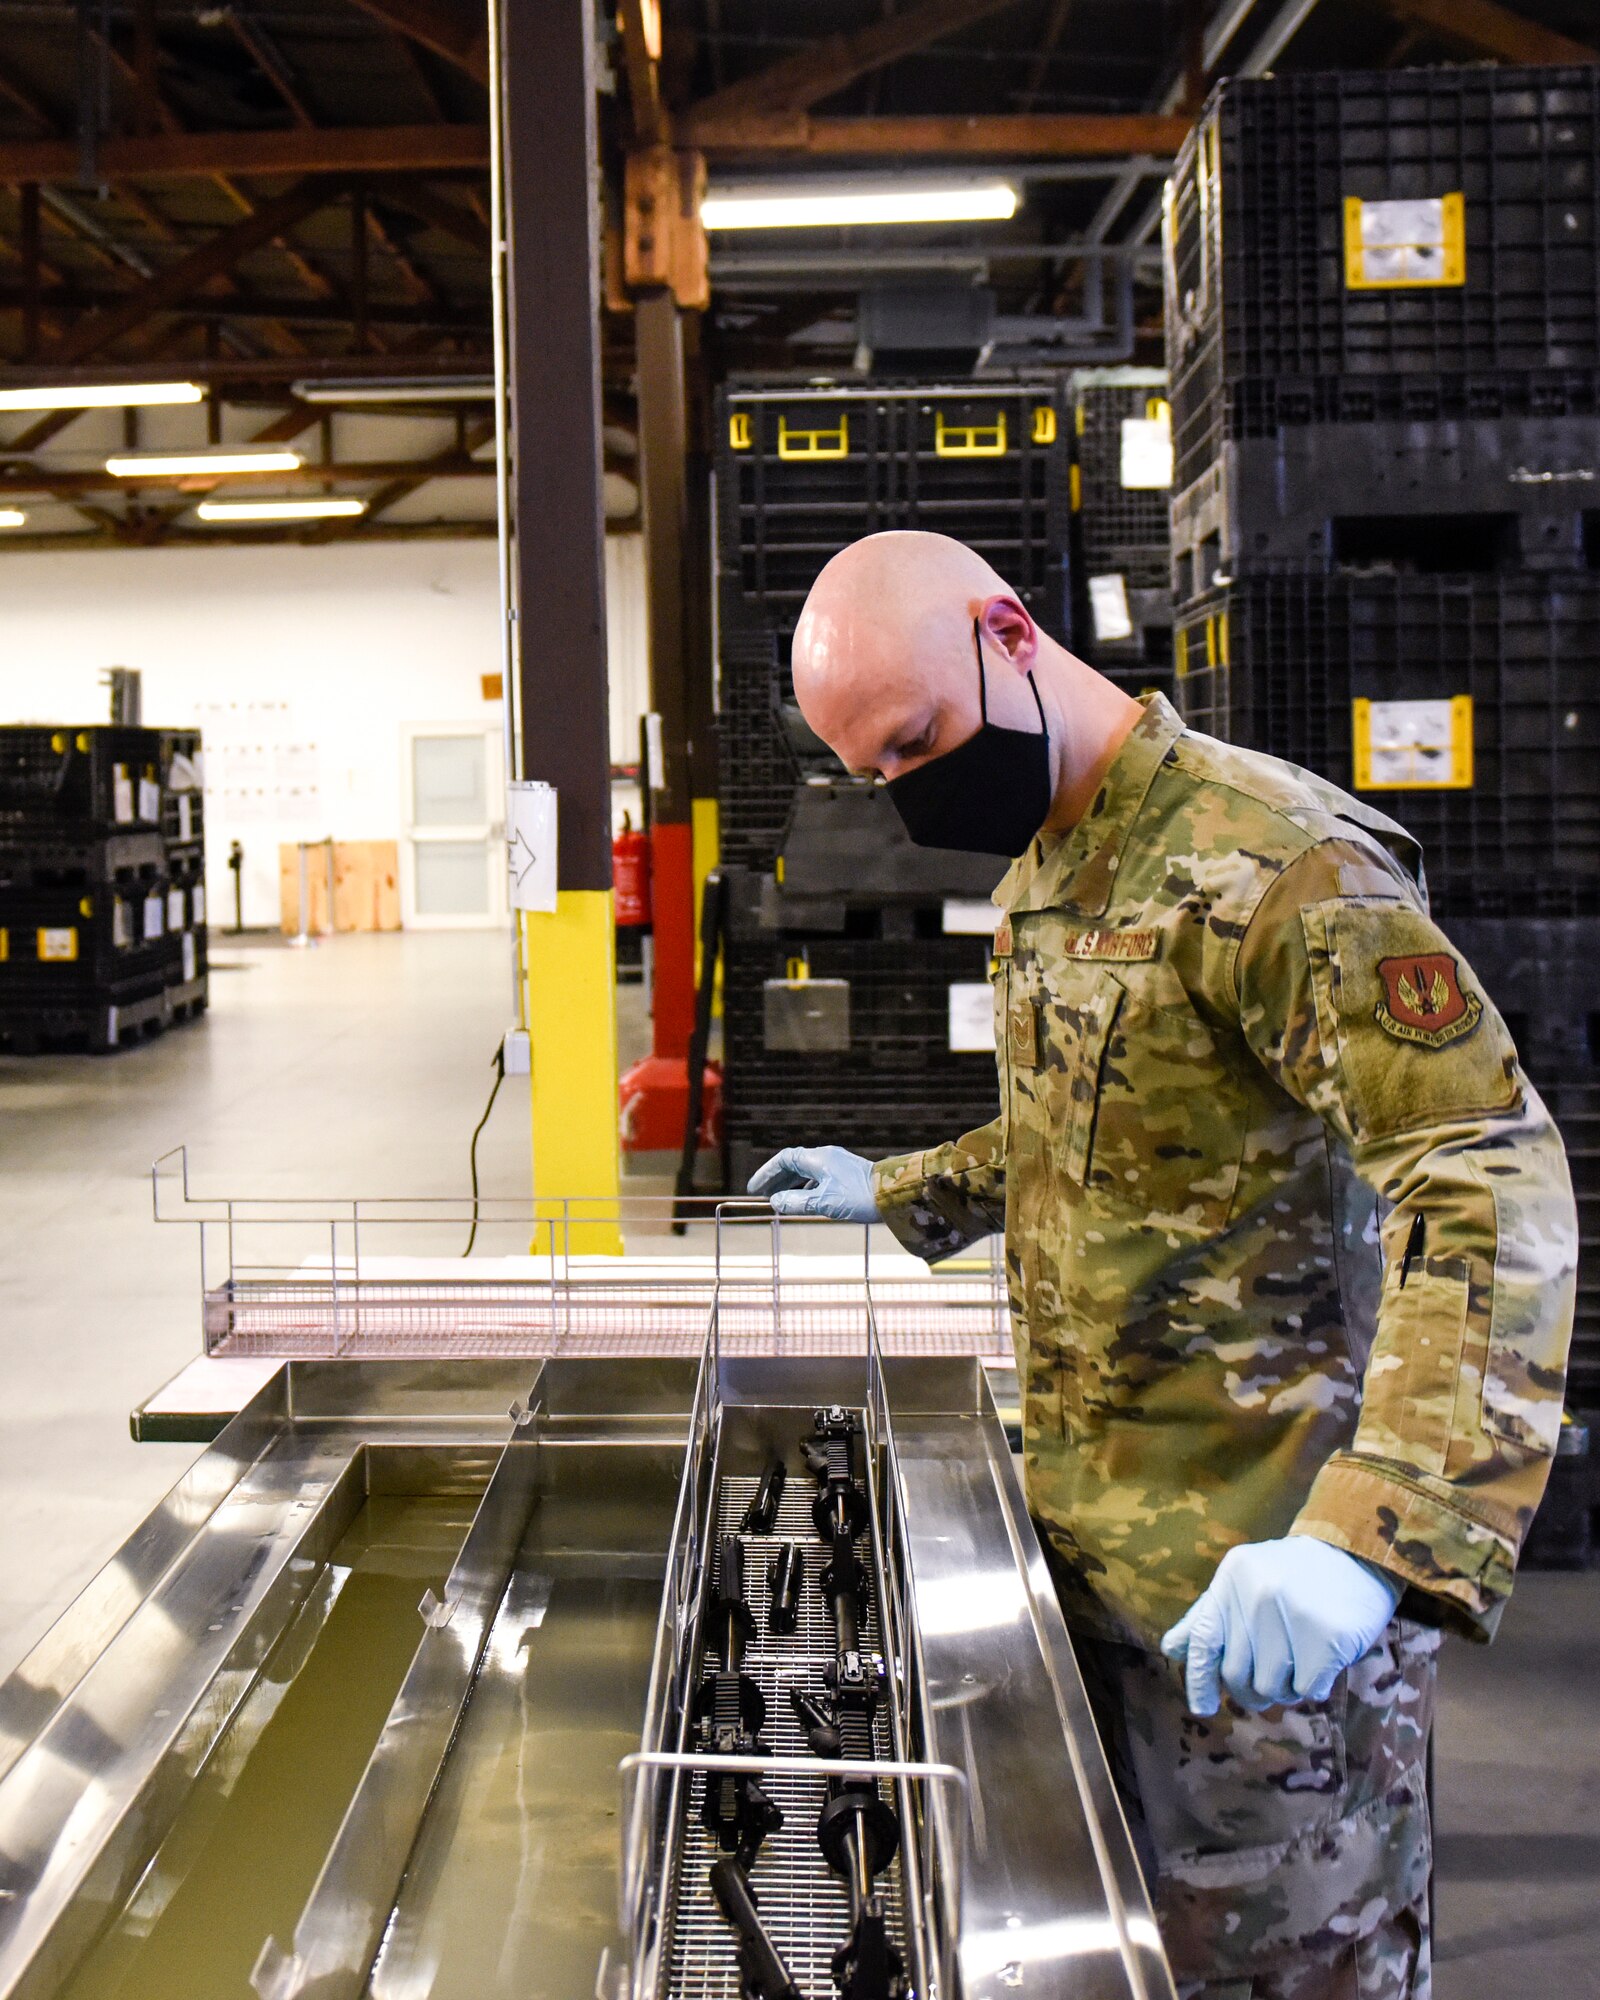 U.S. Air Force Tech. Sgt. Kyle Deconnick, 52nd Logistics Readiness Squadron NCOIC of Individual Protective Equipment, cleans an M4 using a new ultrasonic weapons cleaner at Spangdahlem Air Base, Germany, Nov. 9, 2020. Deconnick led the way to acquiring the machine to enhance the weapons cleaning process and save man hours. (Air Force photo by Senior Airman Chanceler Nardone)